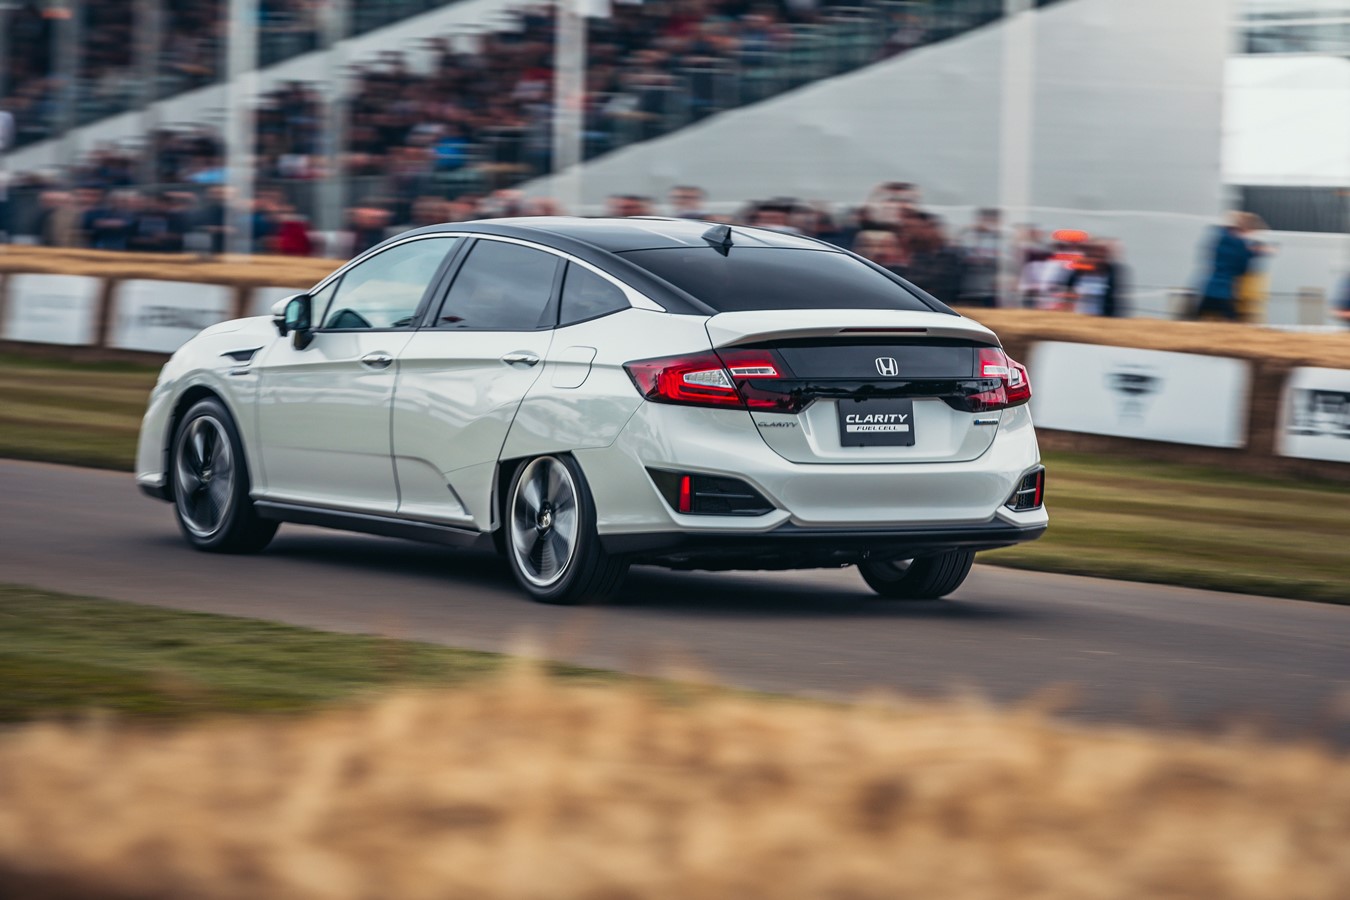 Honda Clarity Fuel Cell at Goodwood FoS 2017